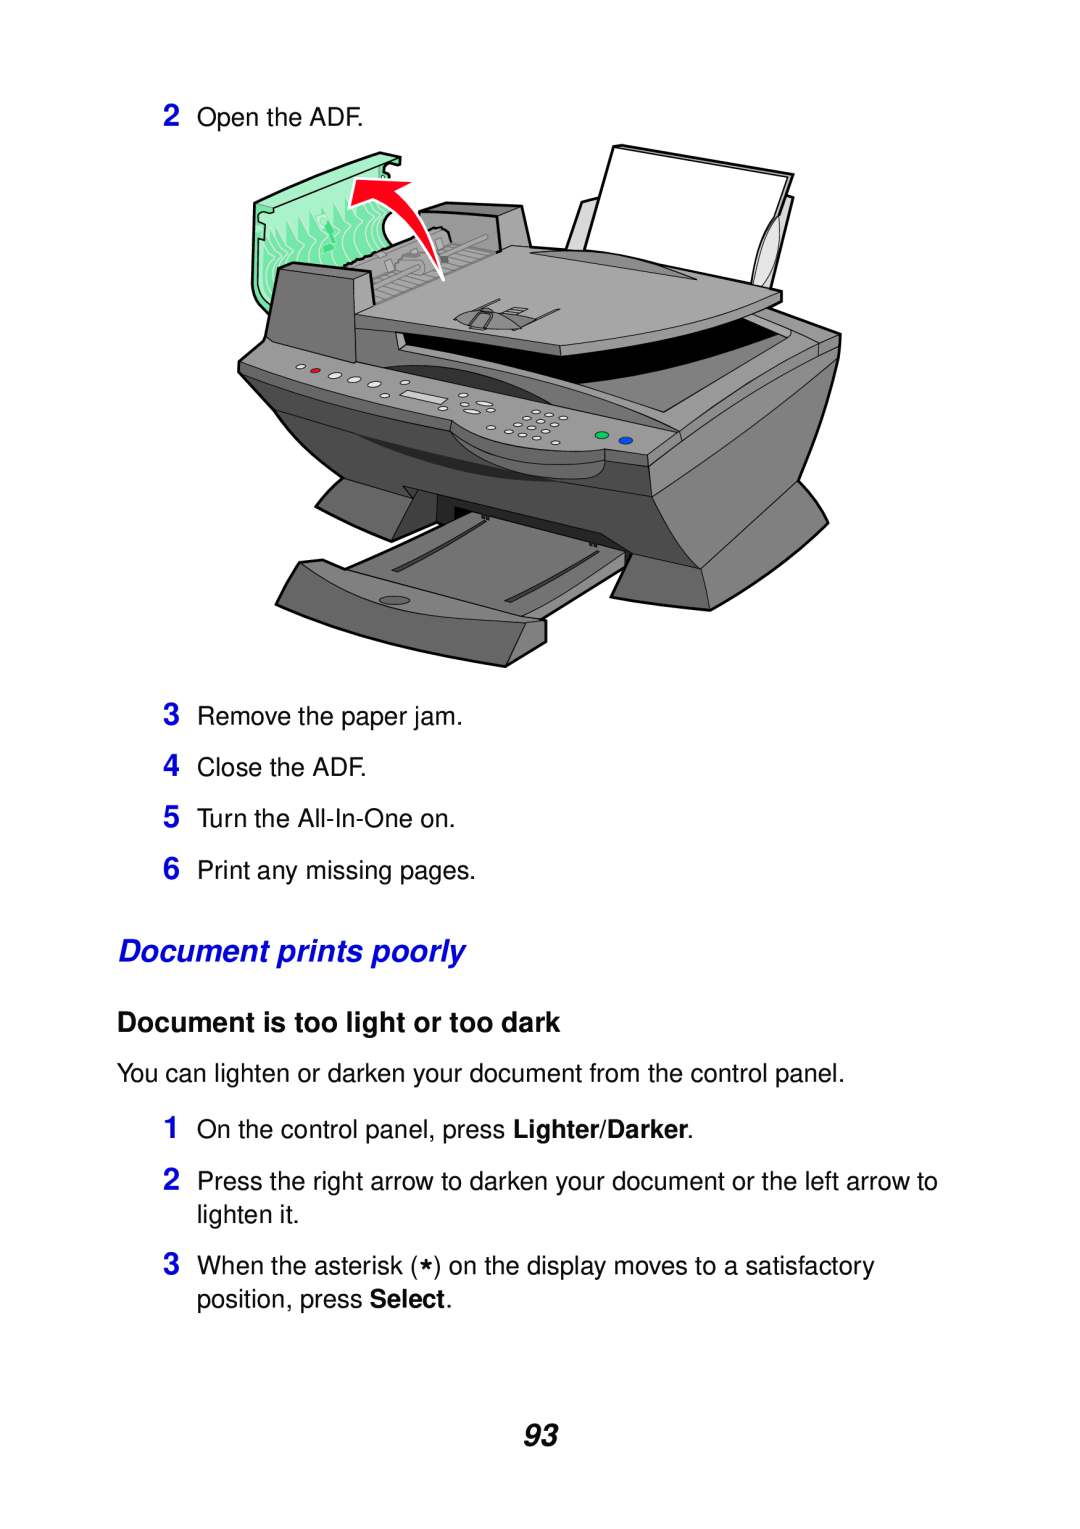 Lexmark X6100 manual Document prints poorly, Document is too light or too dark 